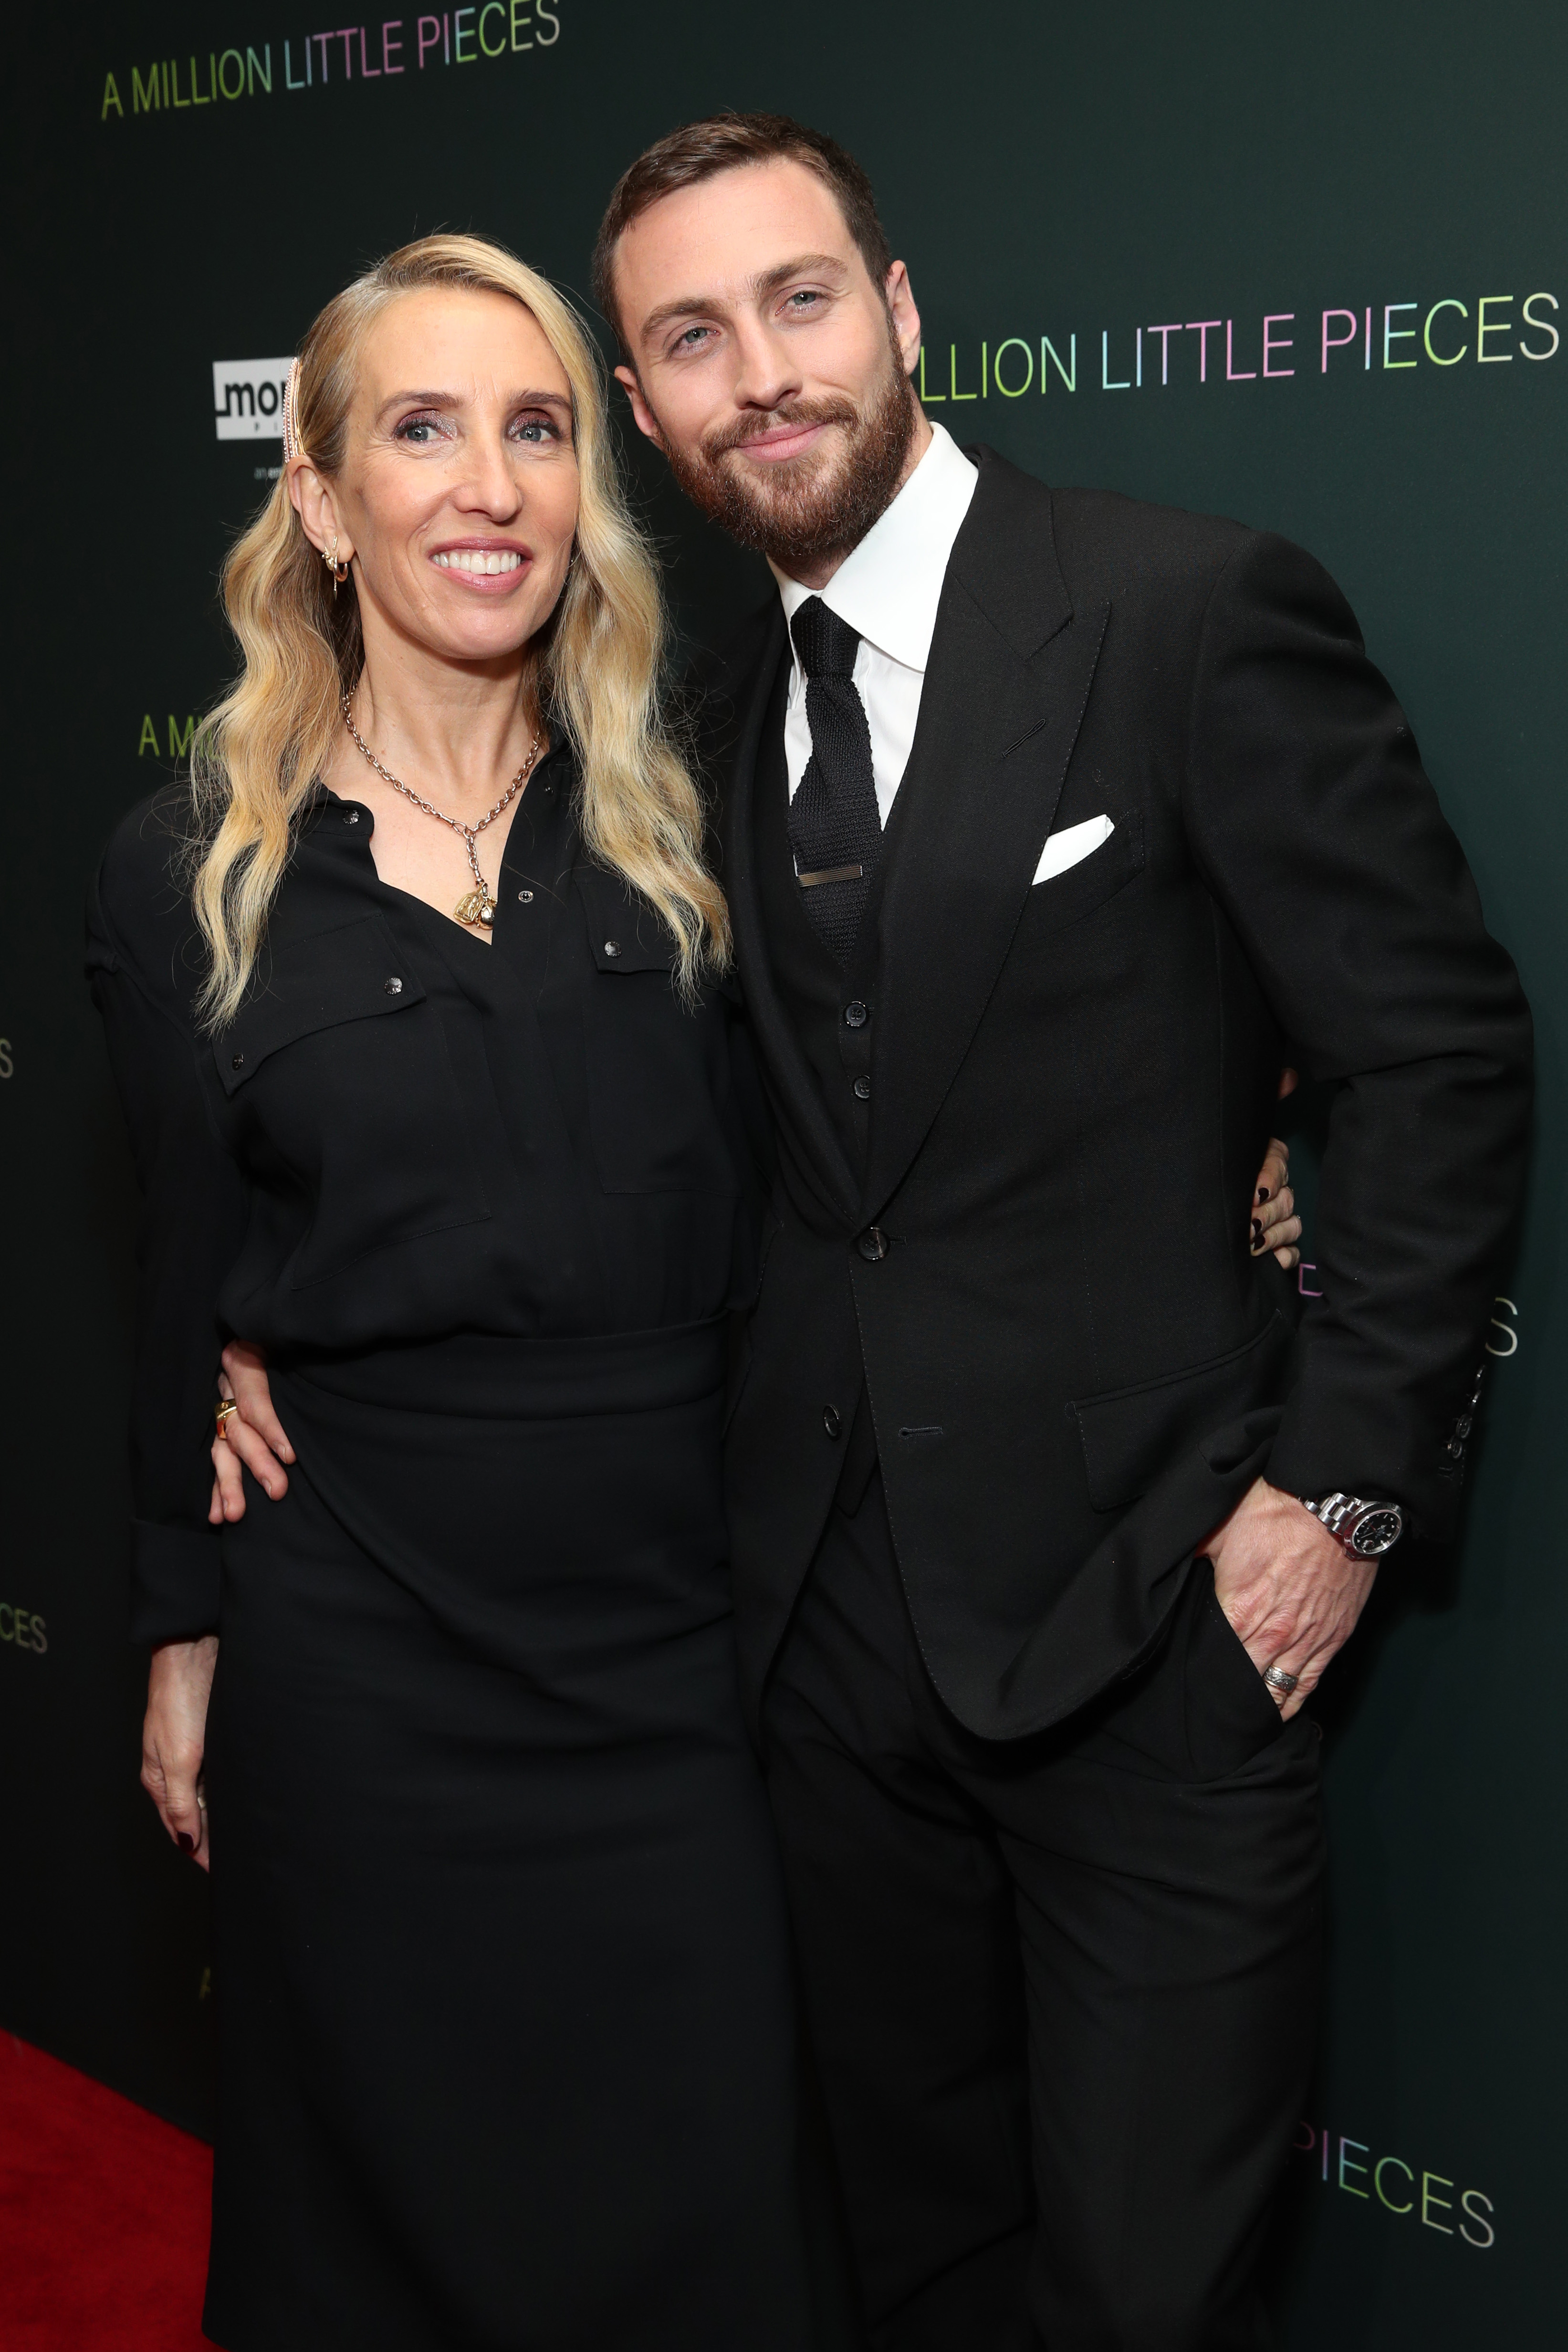 Sam Taylor-Johnson and Aaron Taylor-Johnson posing together; Sam in a dress and Aaron in a suit